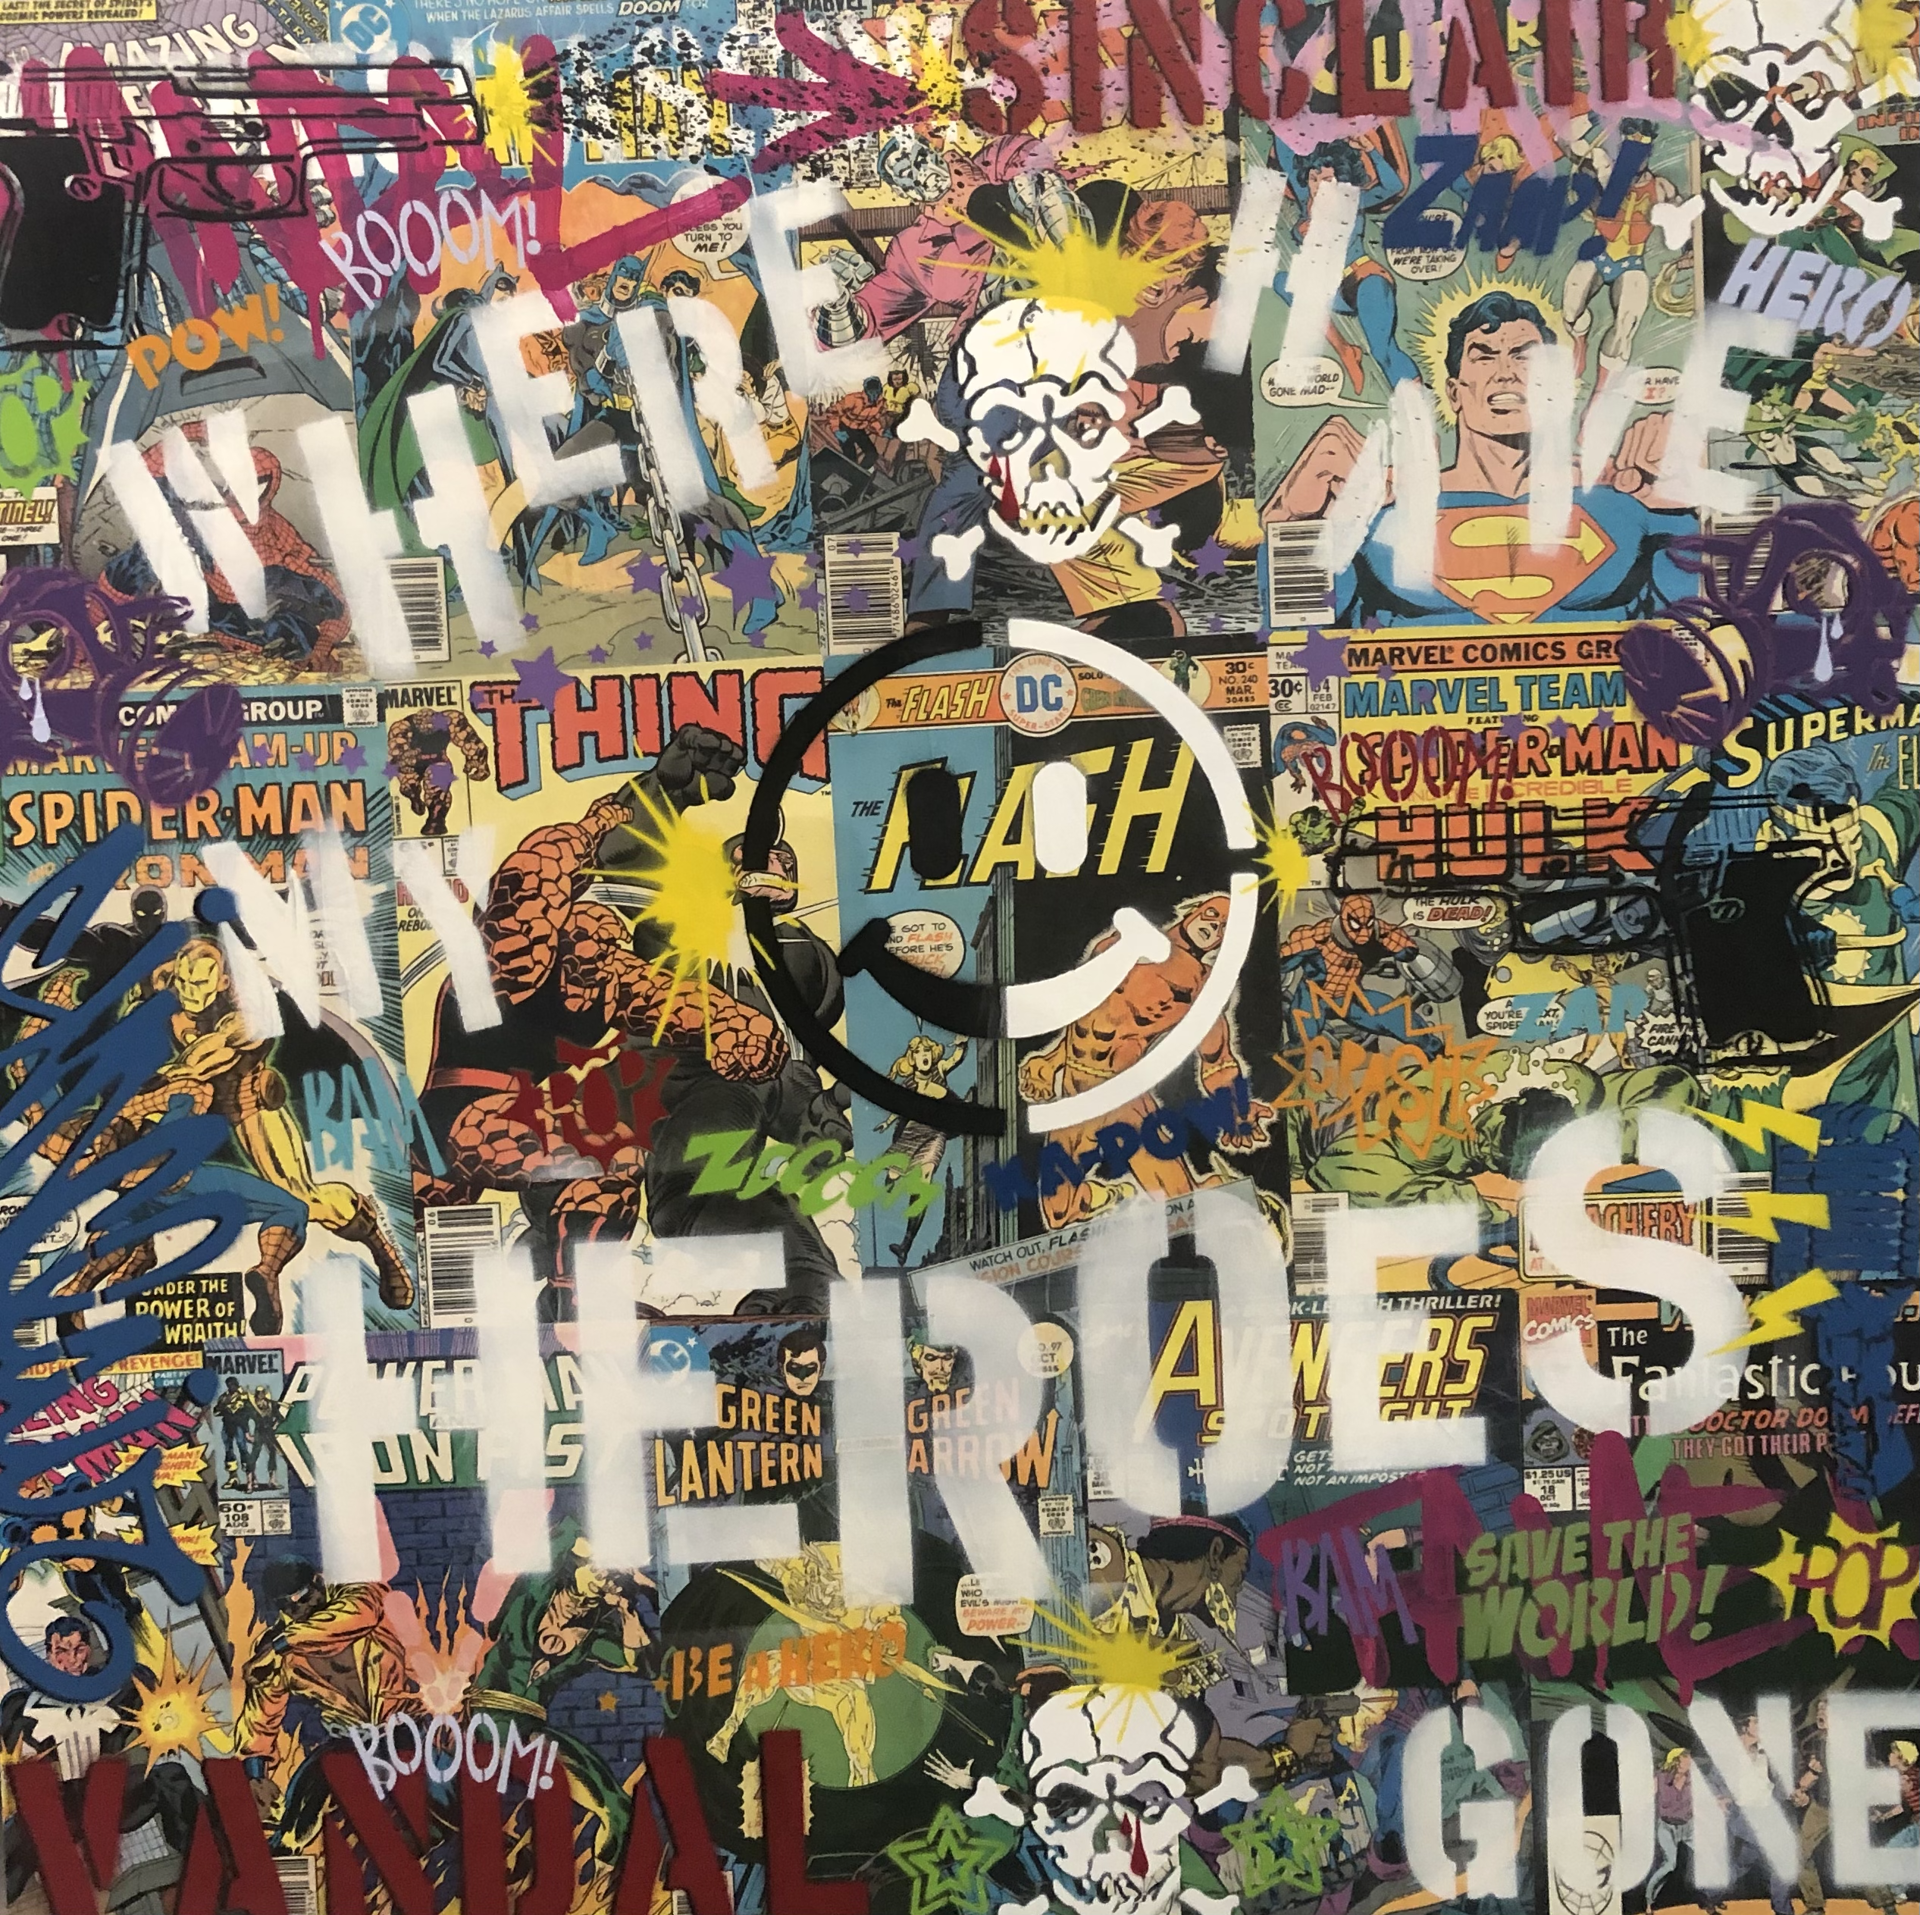 Where Have All My Heroes Gone by Sinclair The Vandal